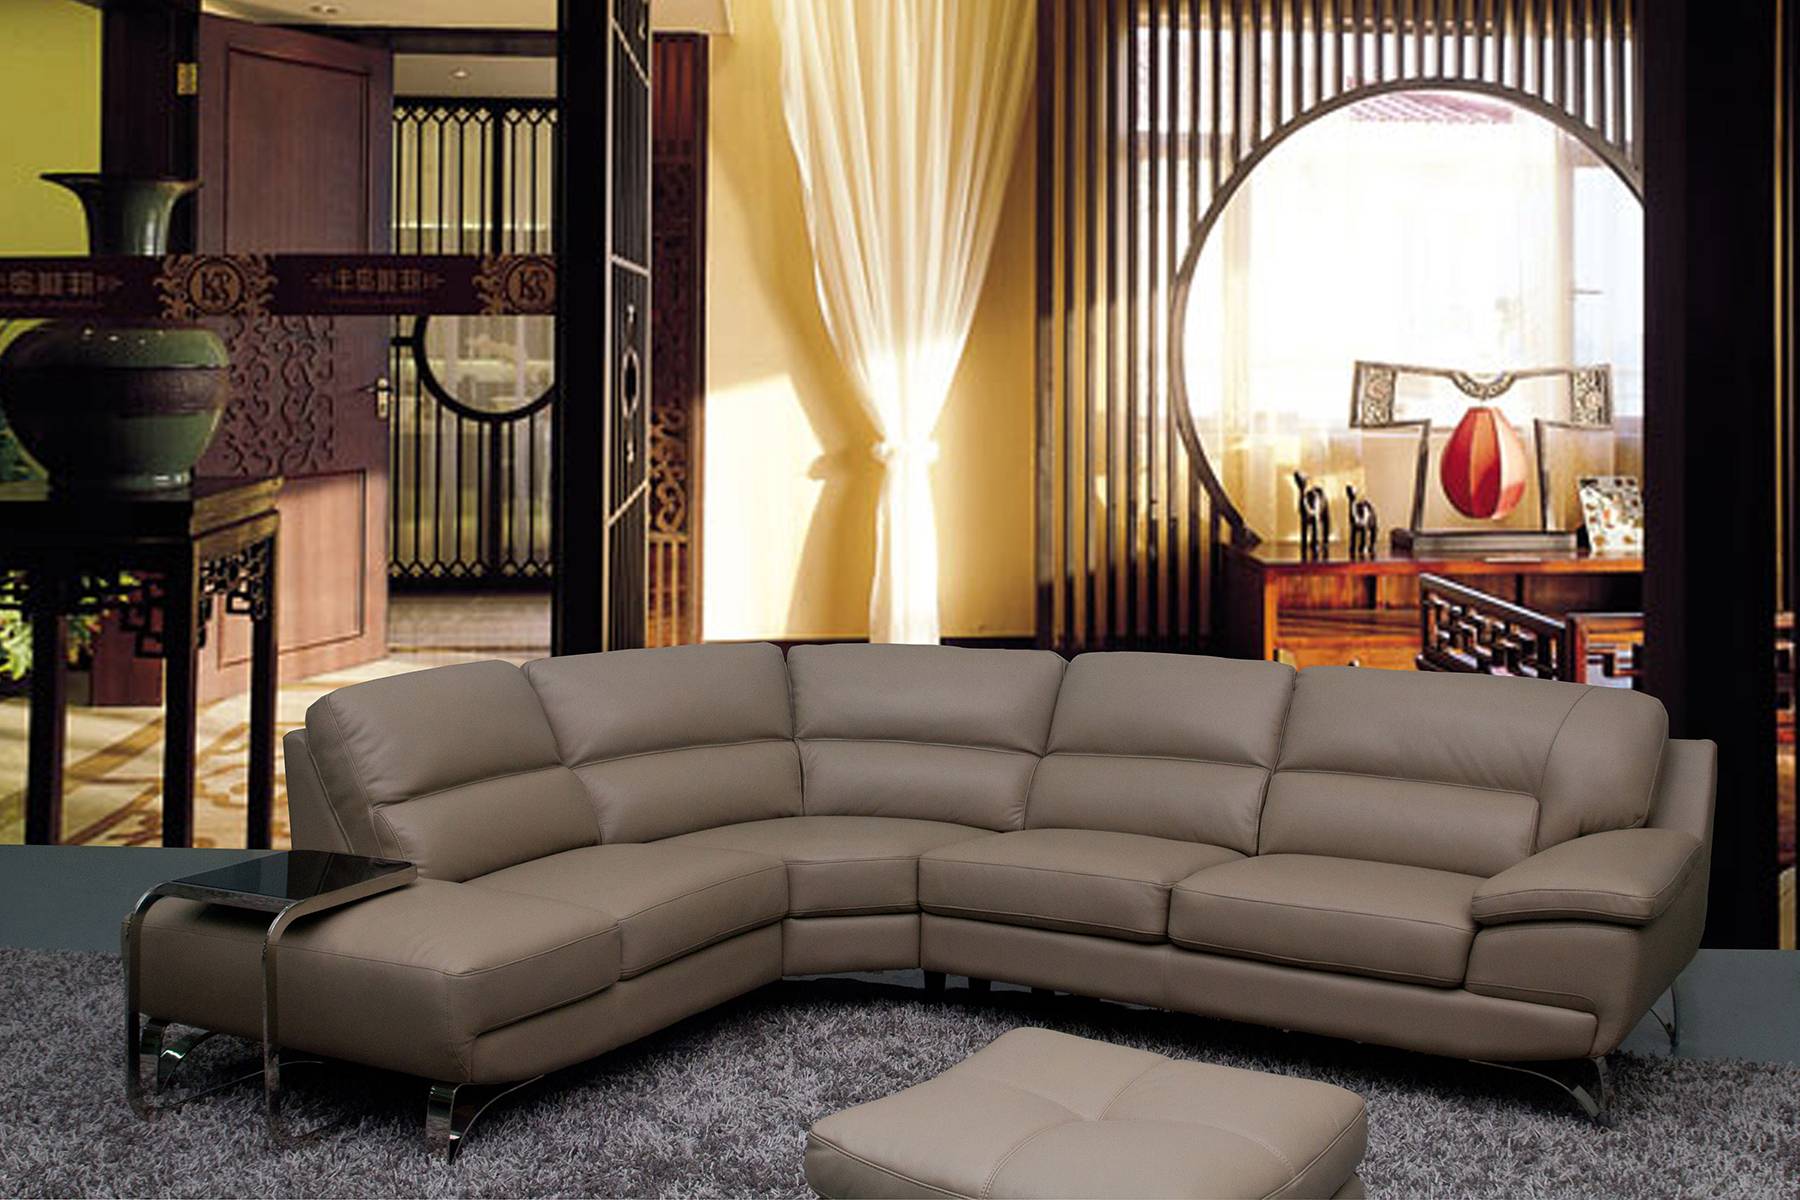 sectional leather sofa at jcpenney